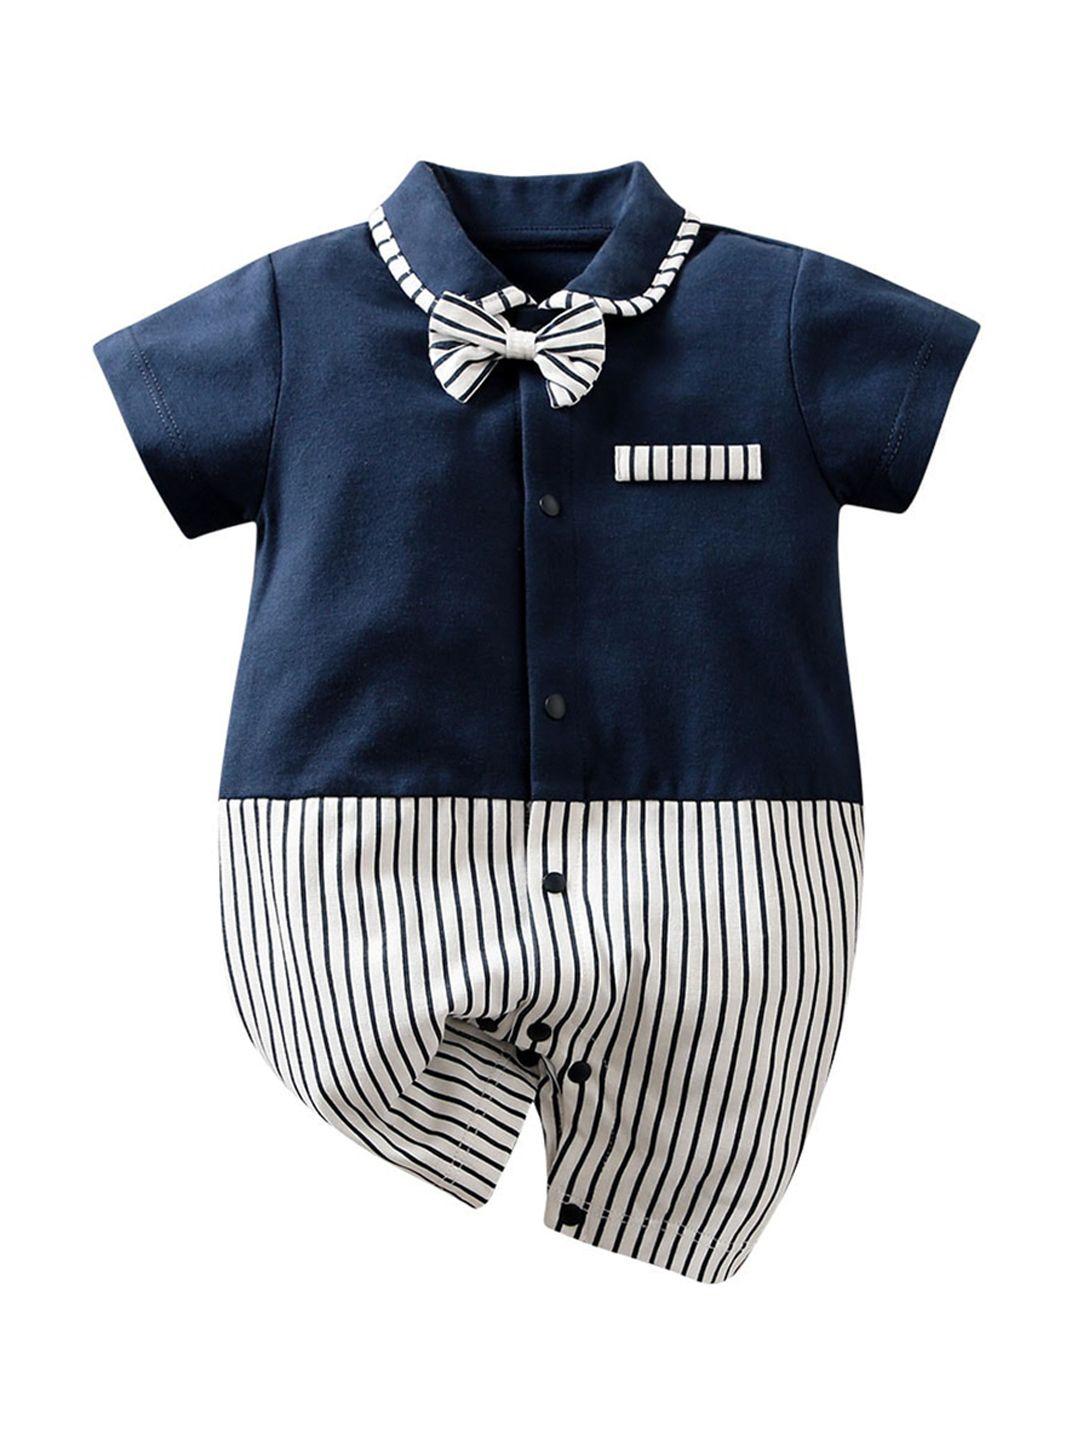 stylecast infant boys navy blue striped cotton rompers with bow